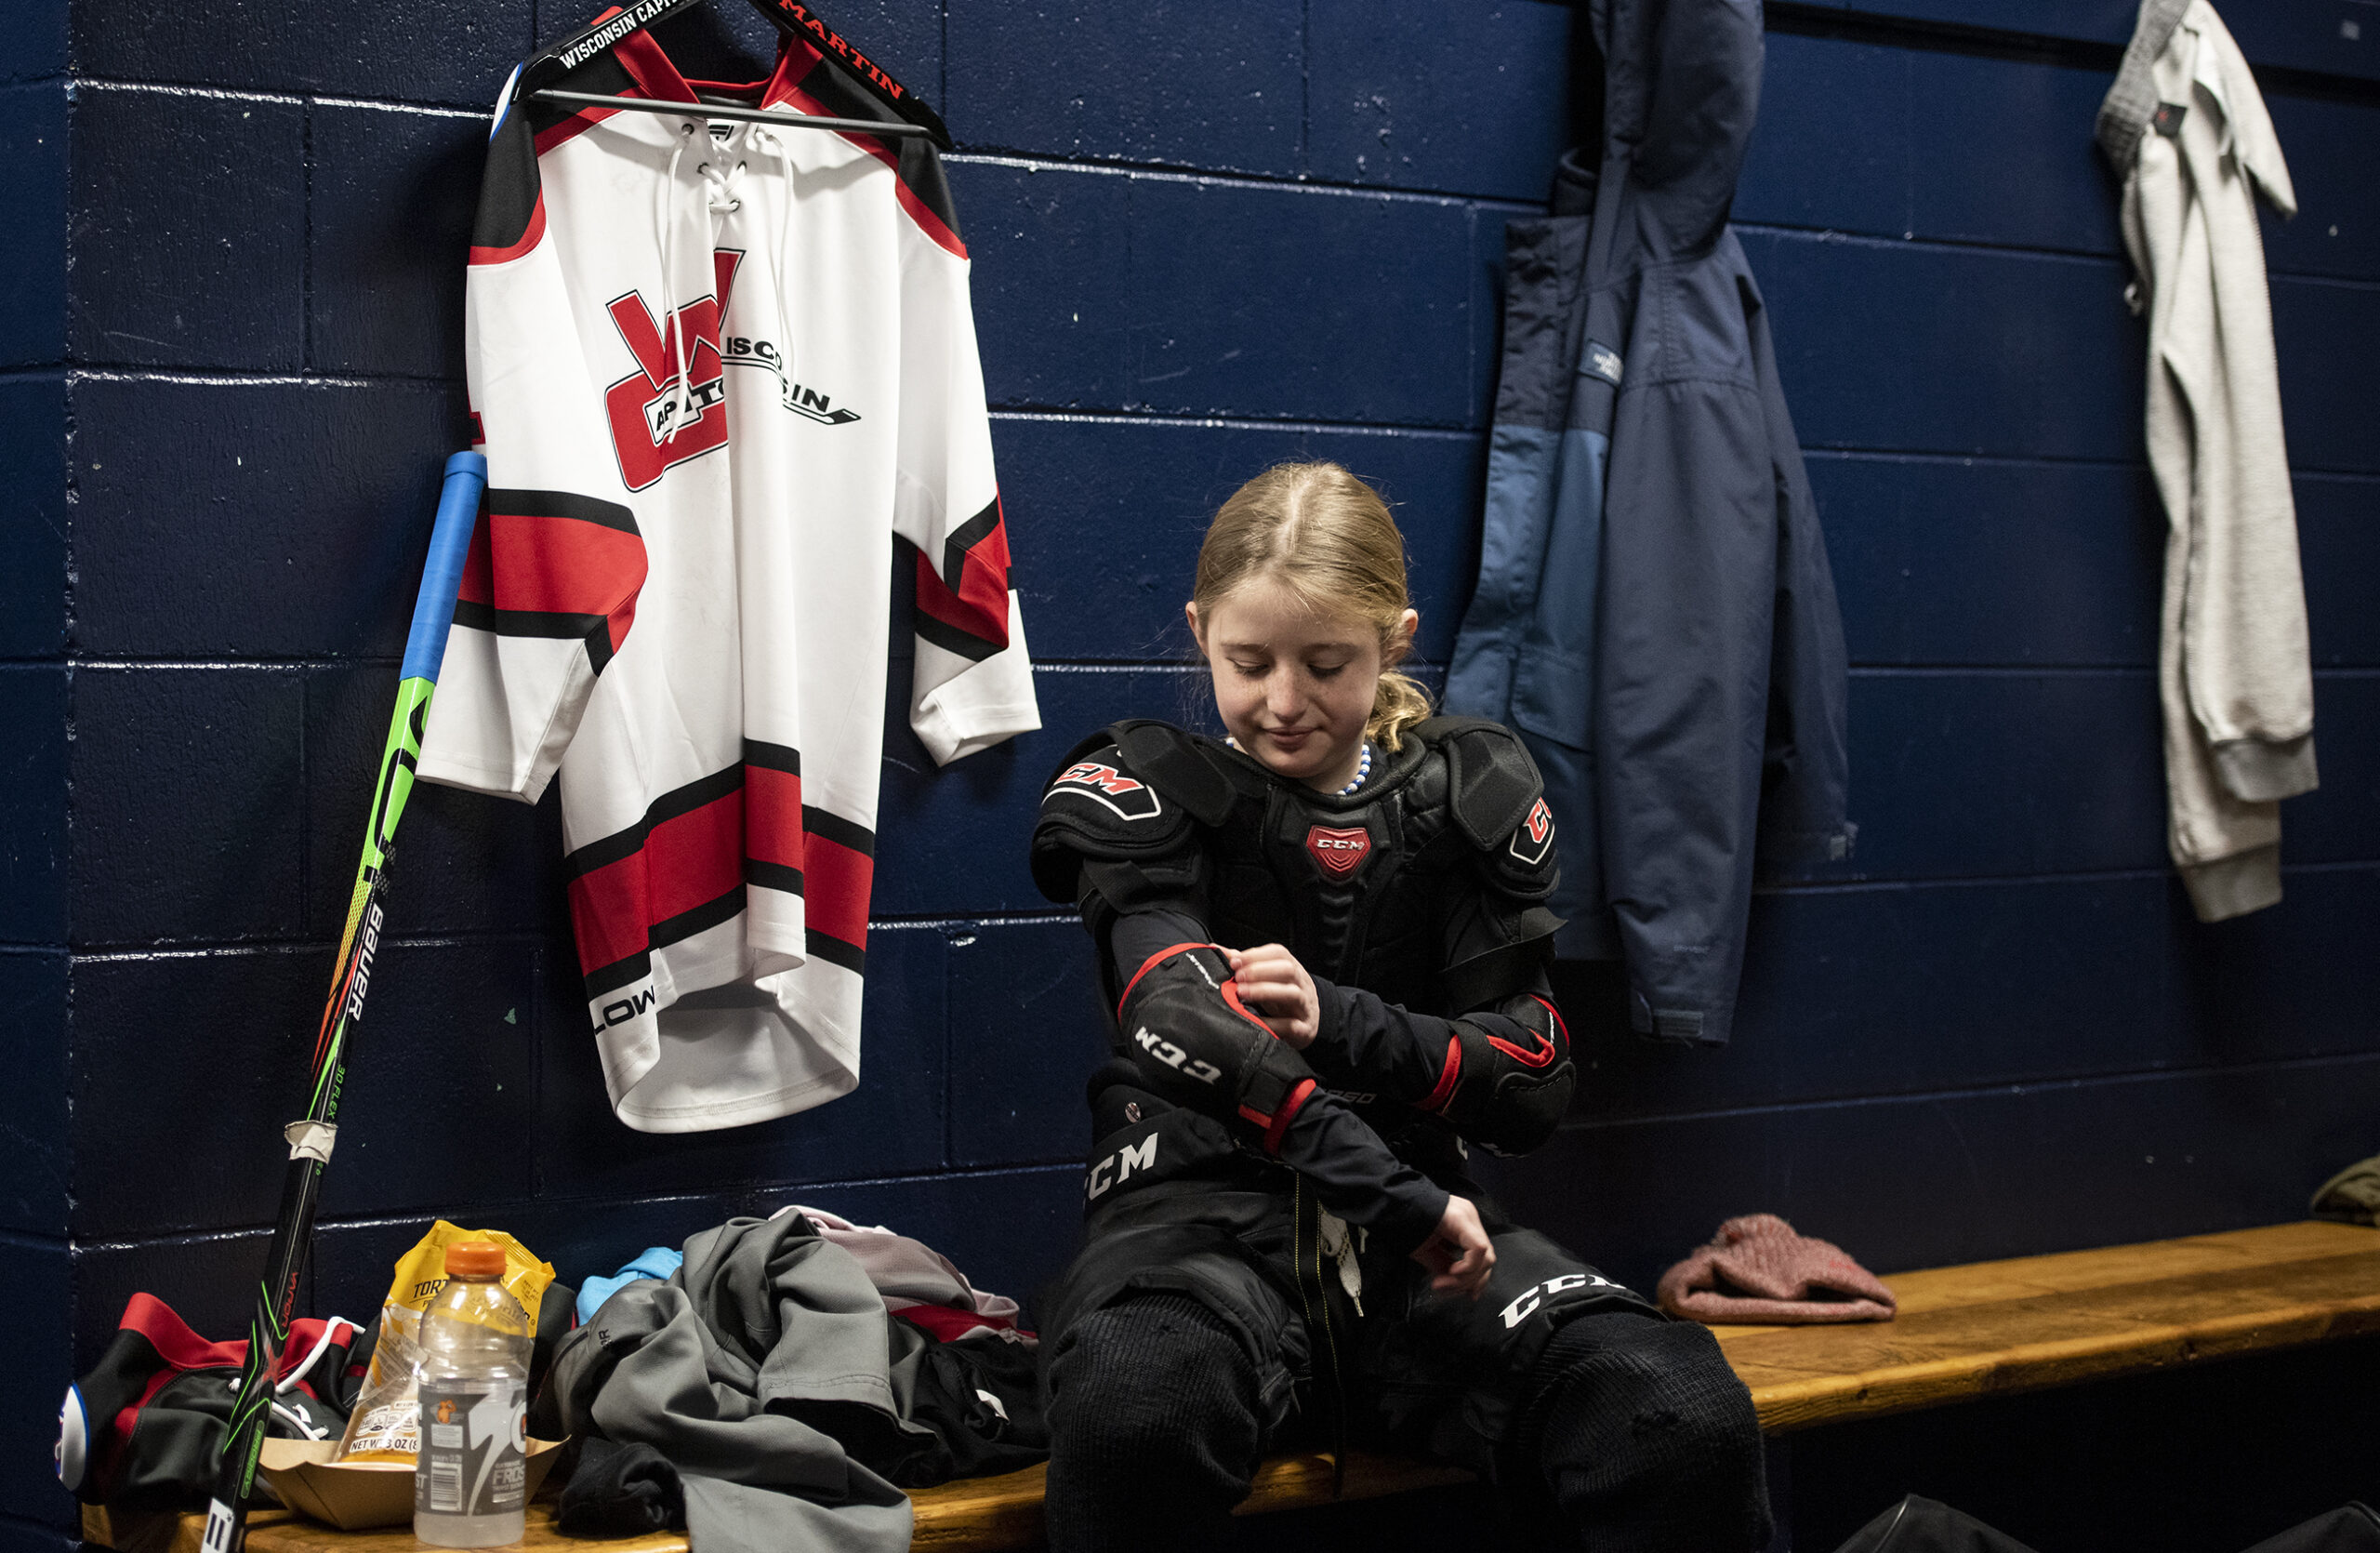 A girl in a locker room puts pads on before practice.